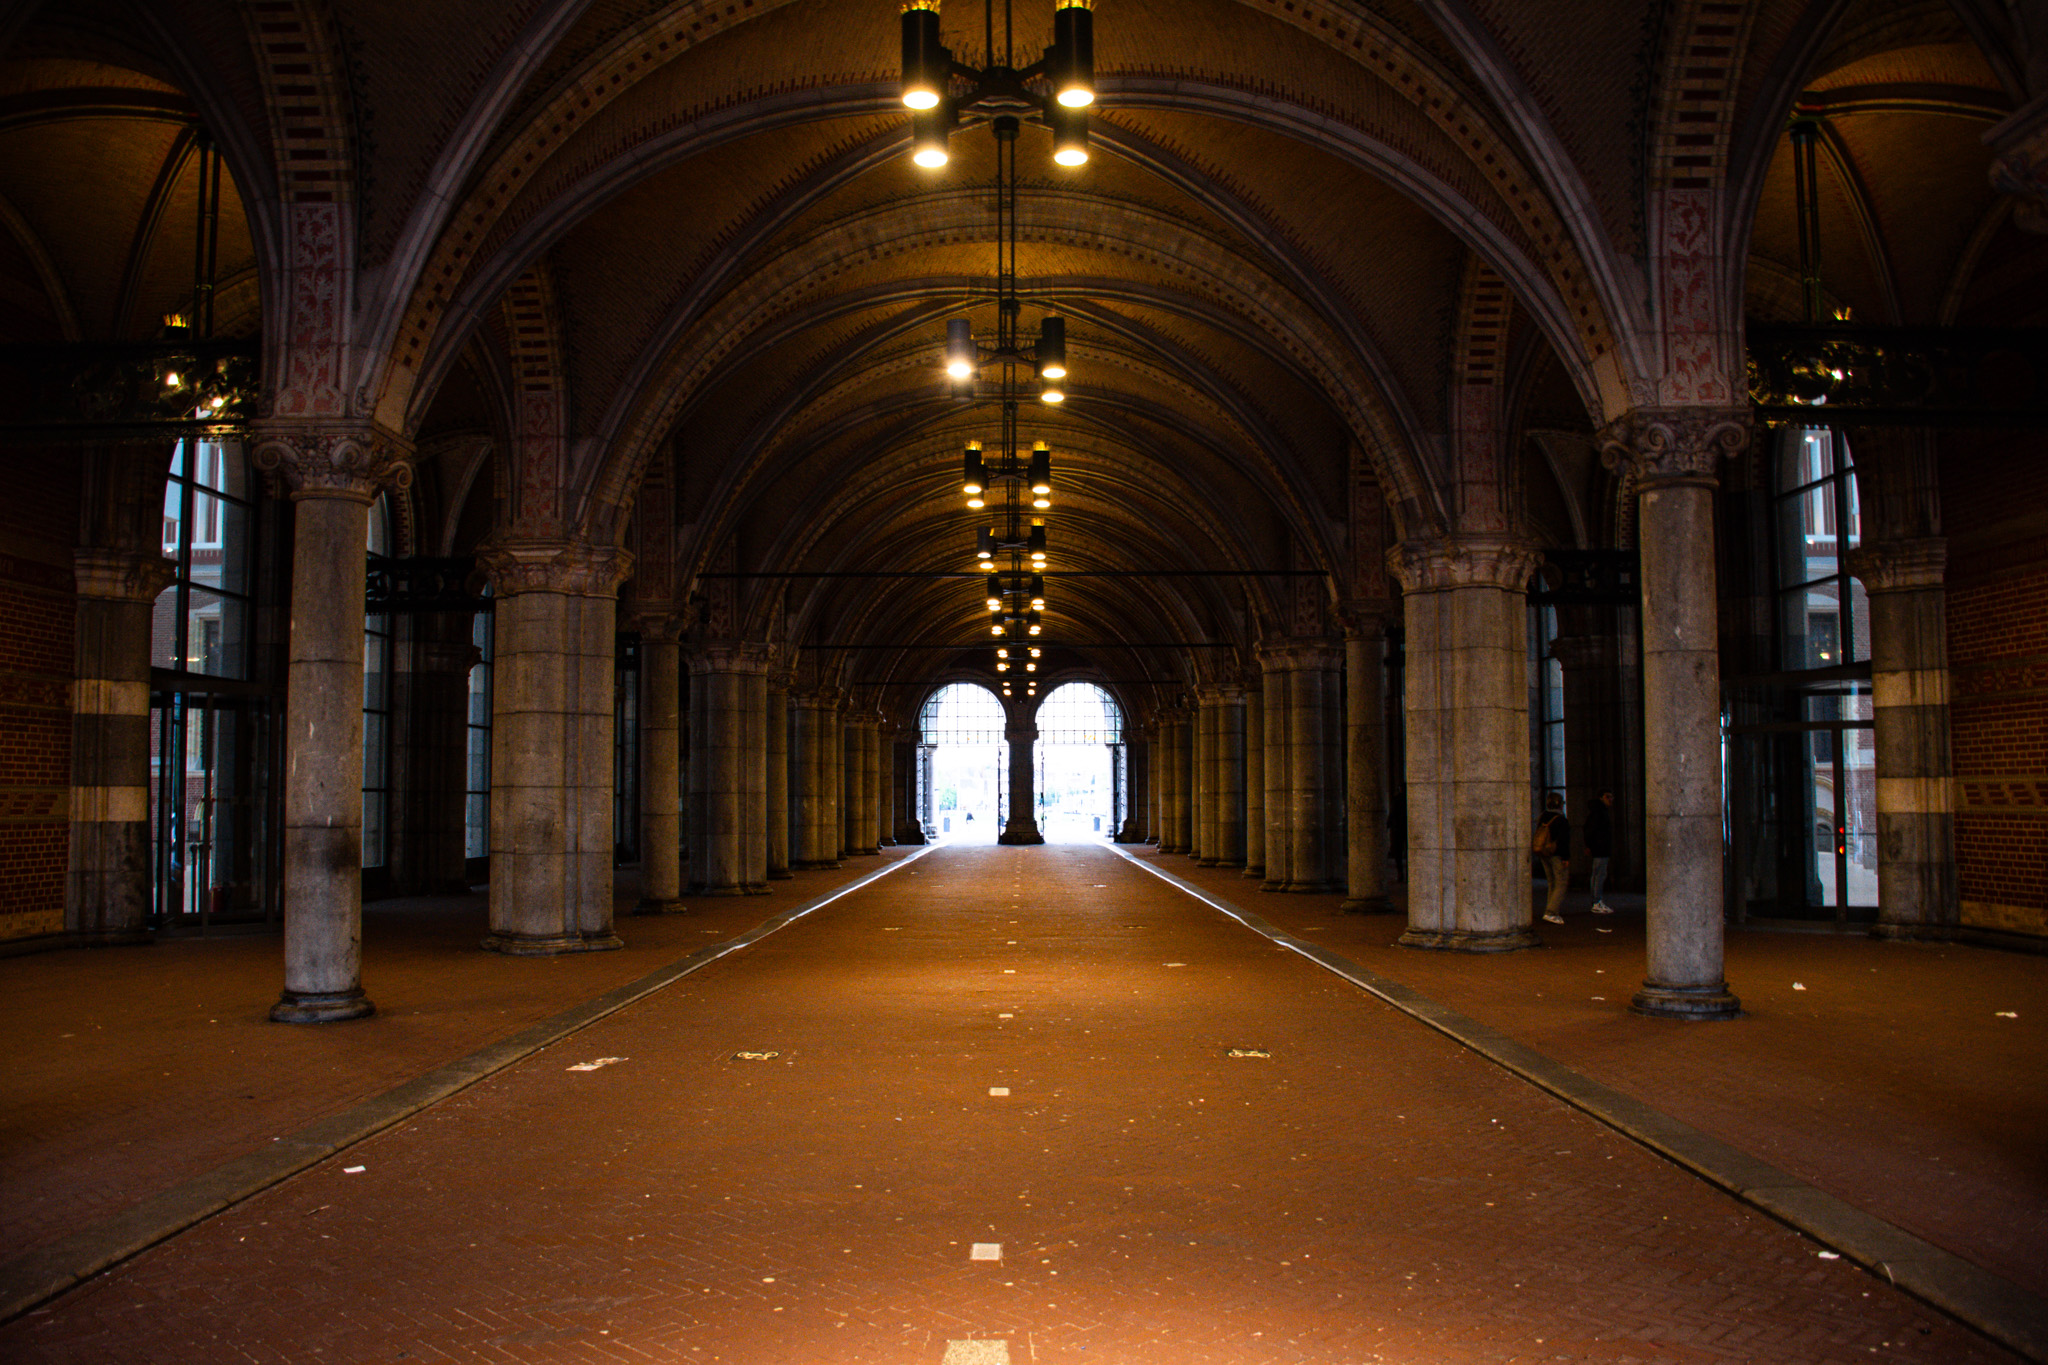 Central perspective (Amsterdam tunnel)...